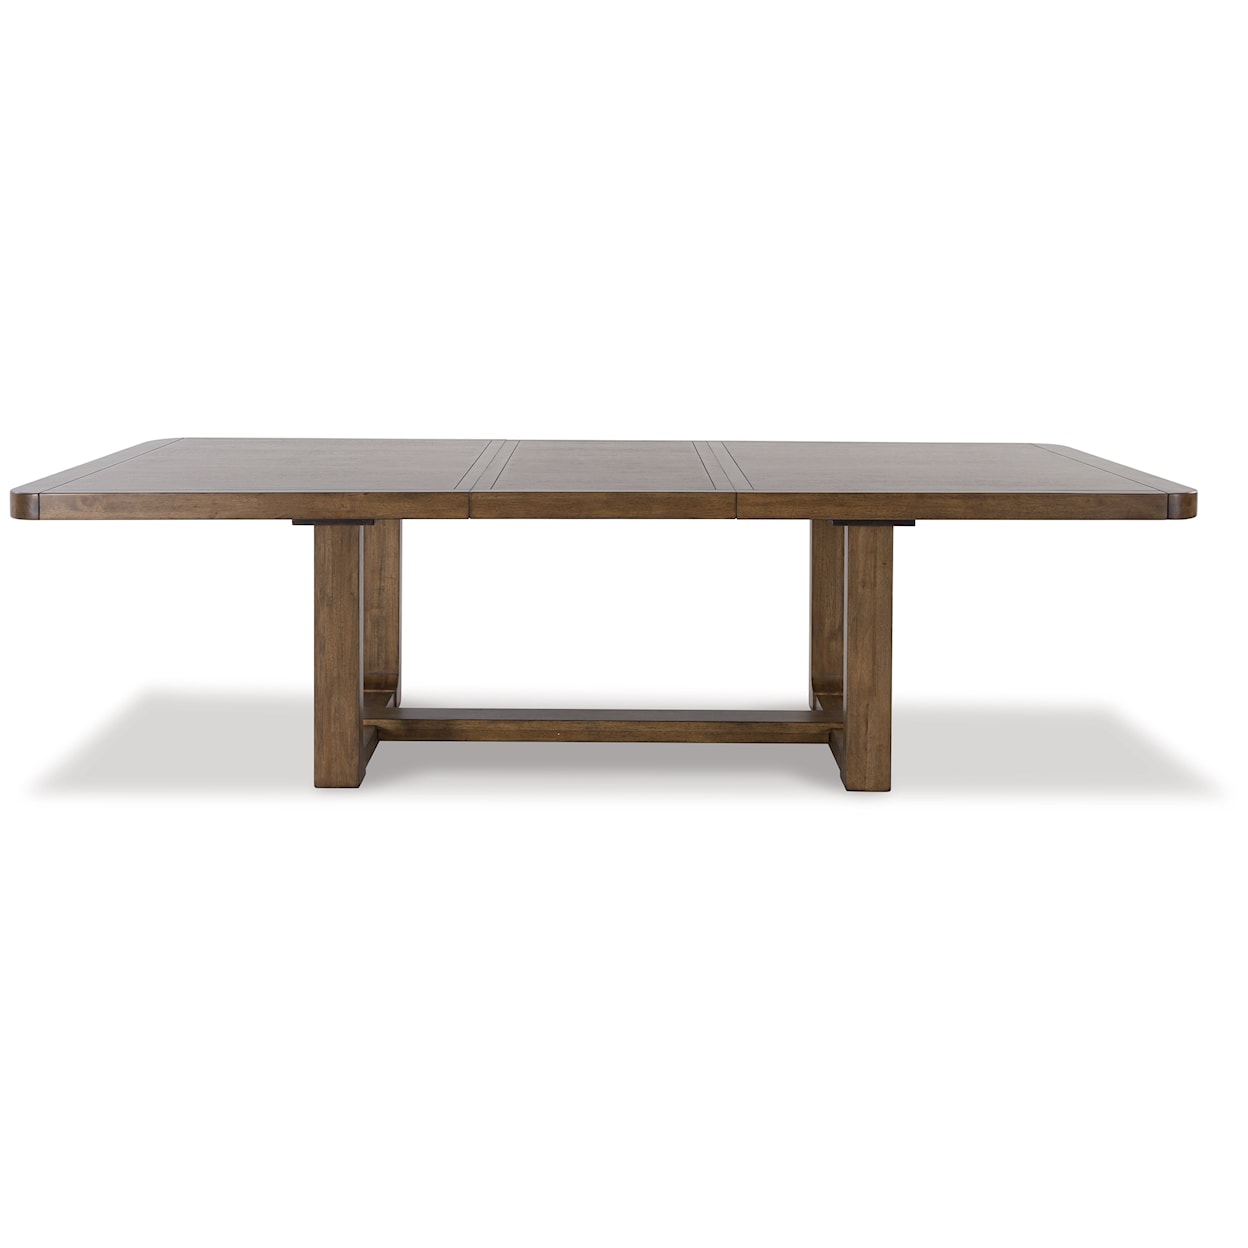 Signature Design by Ashley Clinton Dining Table